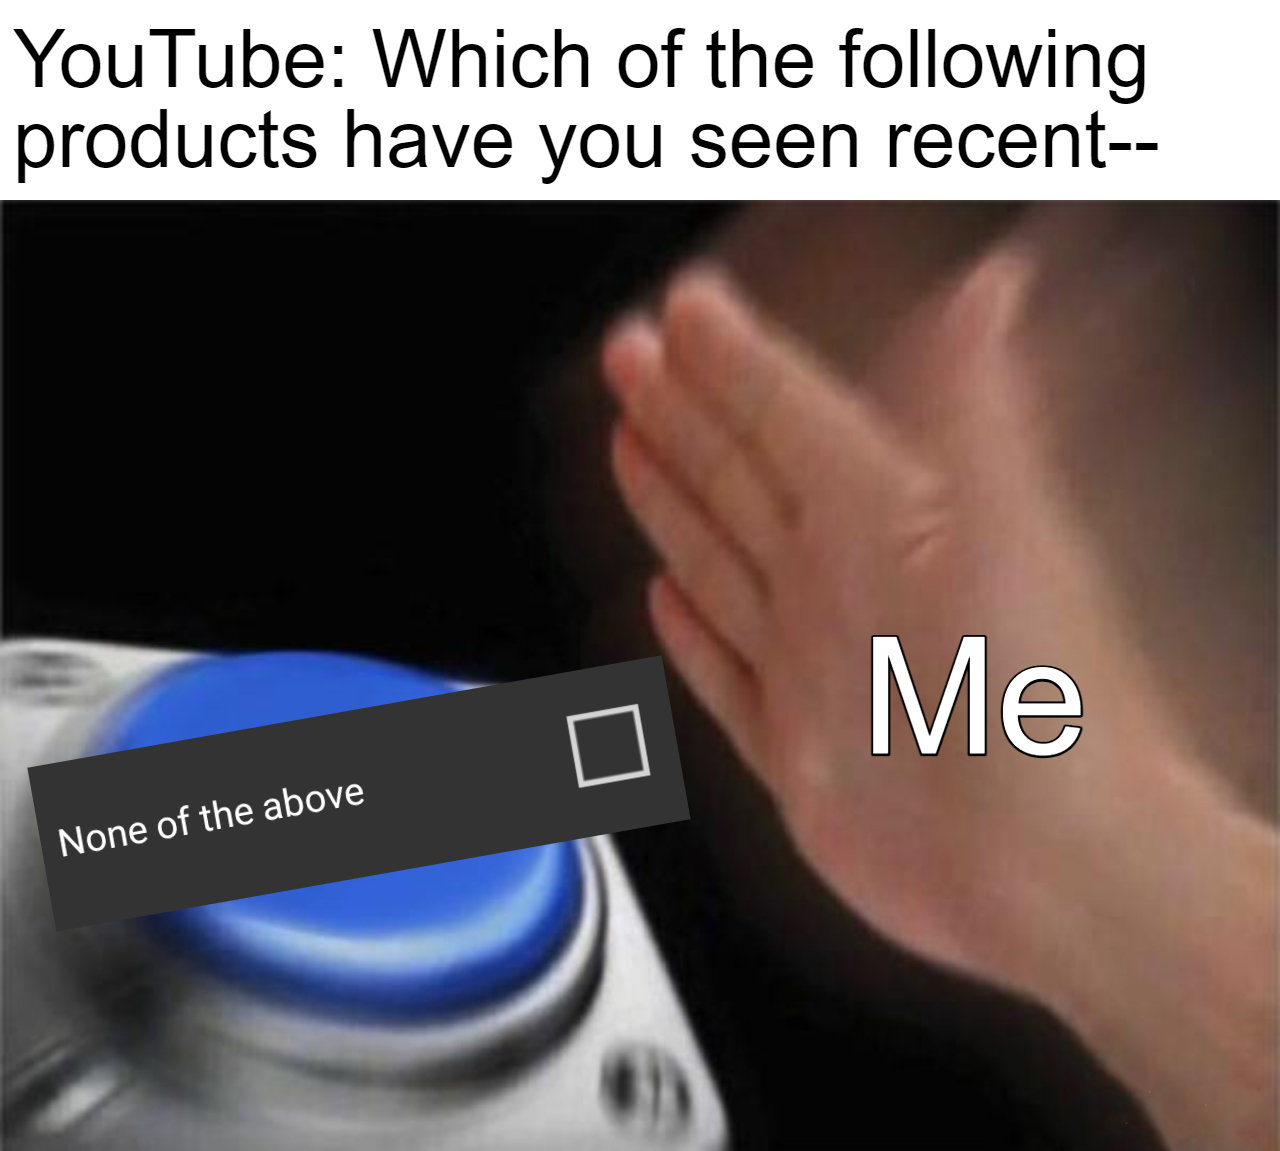 funny memes - dank memes - guy choosing buttons meme - YouTube Which of the ing products have you seen recent I Me None of the above